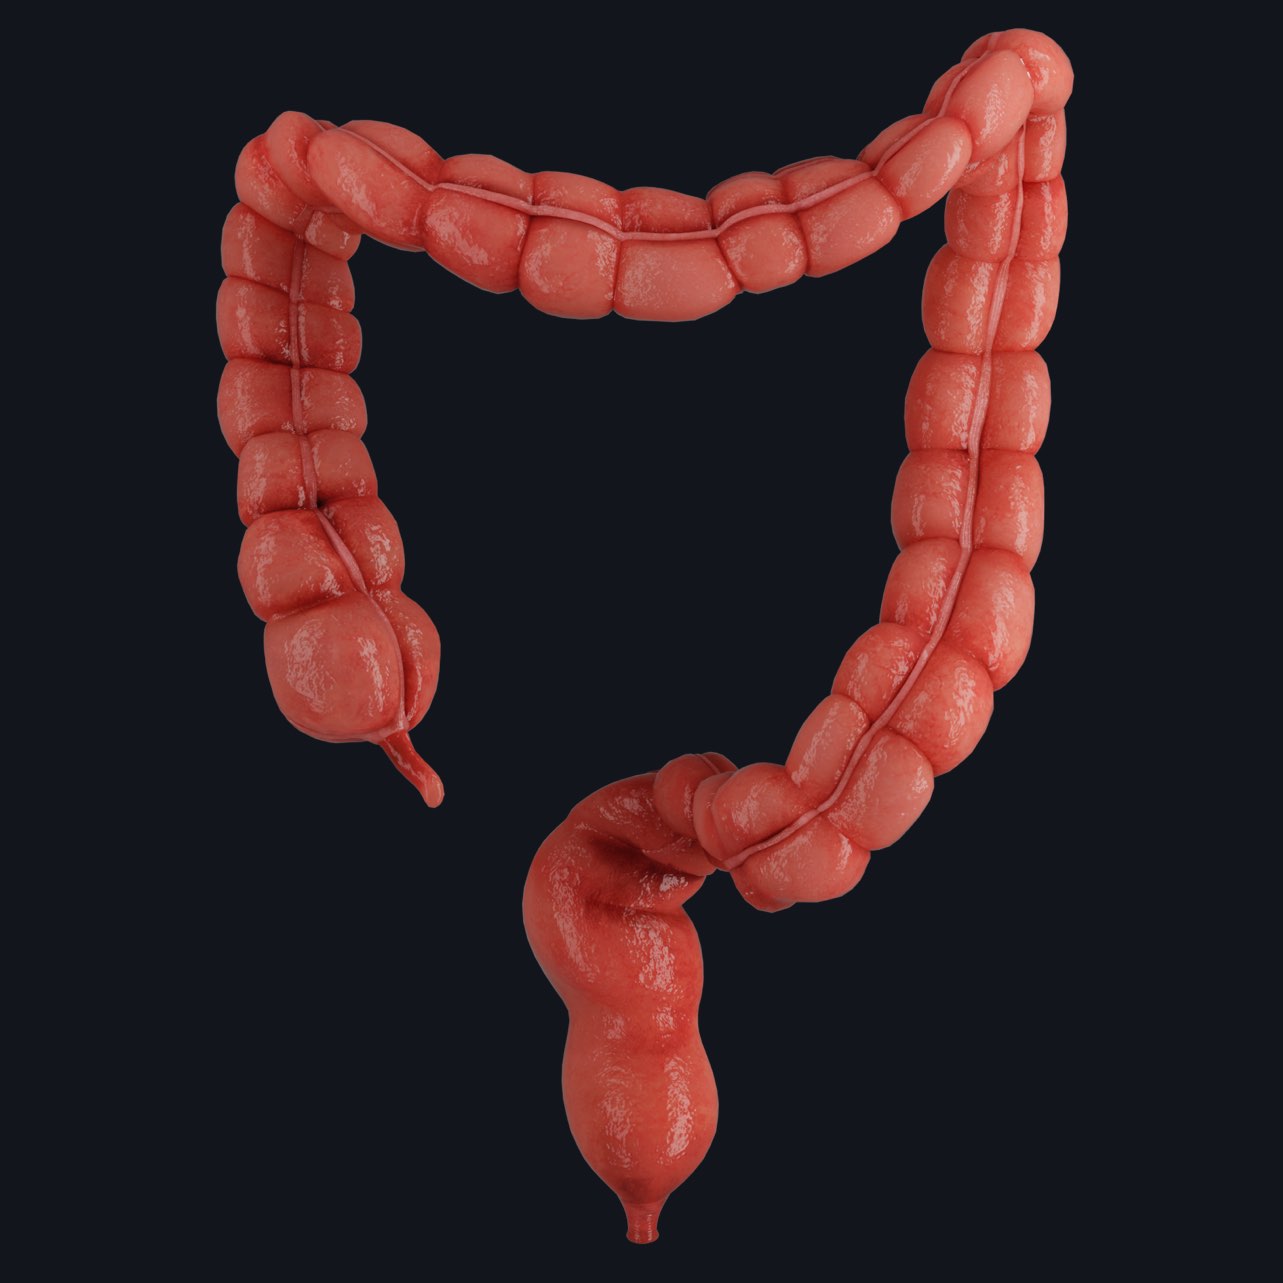 Isolated view of the large intestine showing the appendix, cecum, colon, rectum, and anal canal